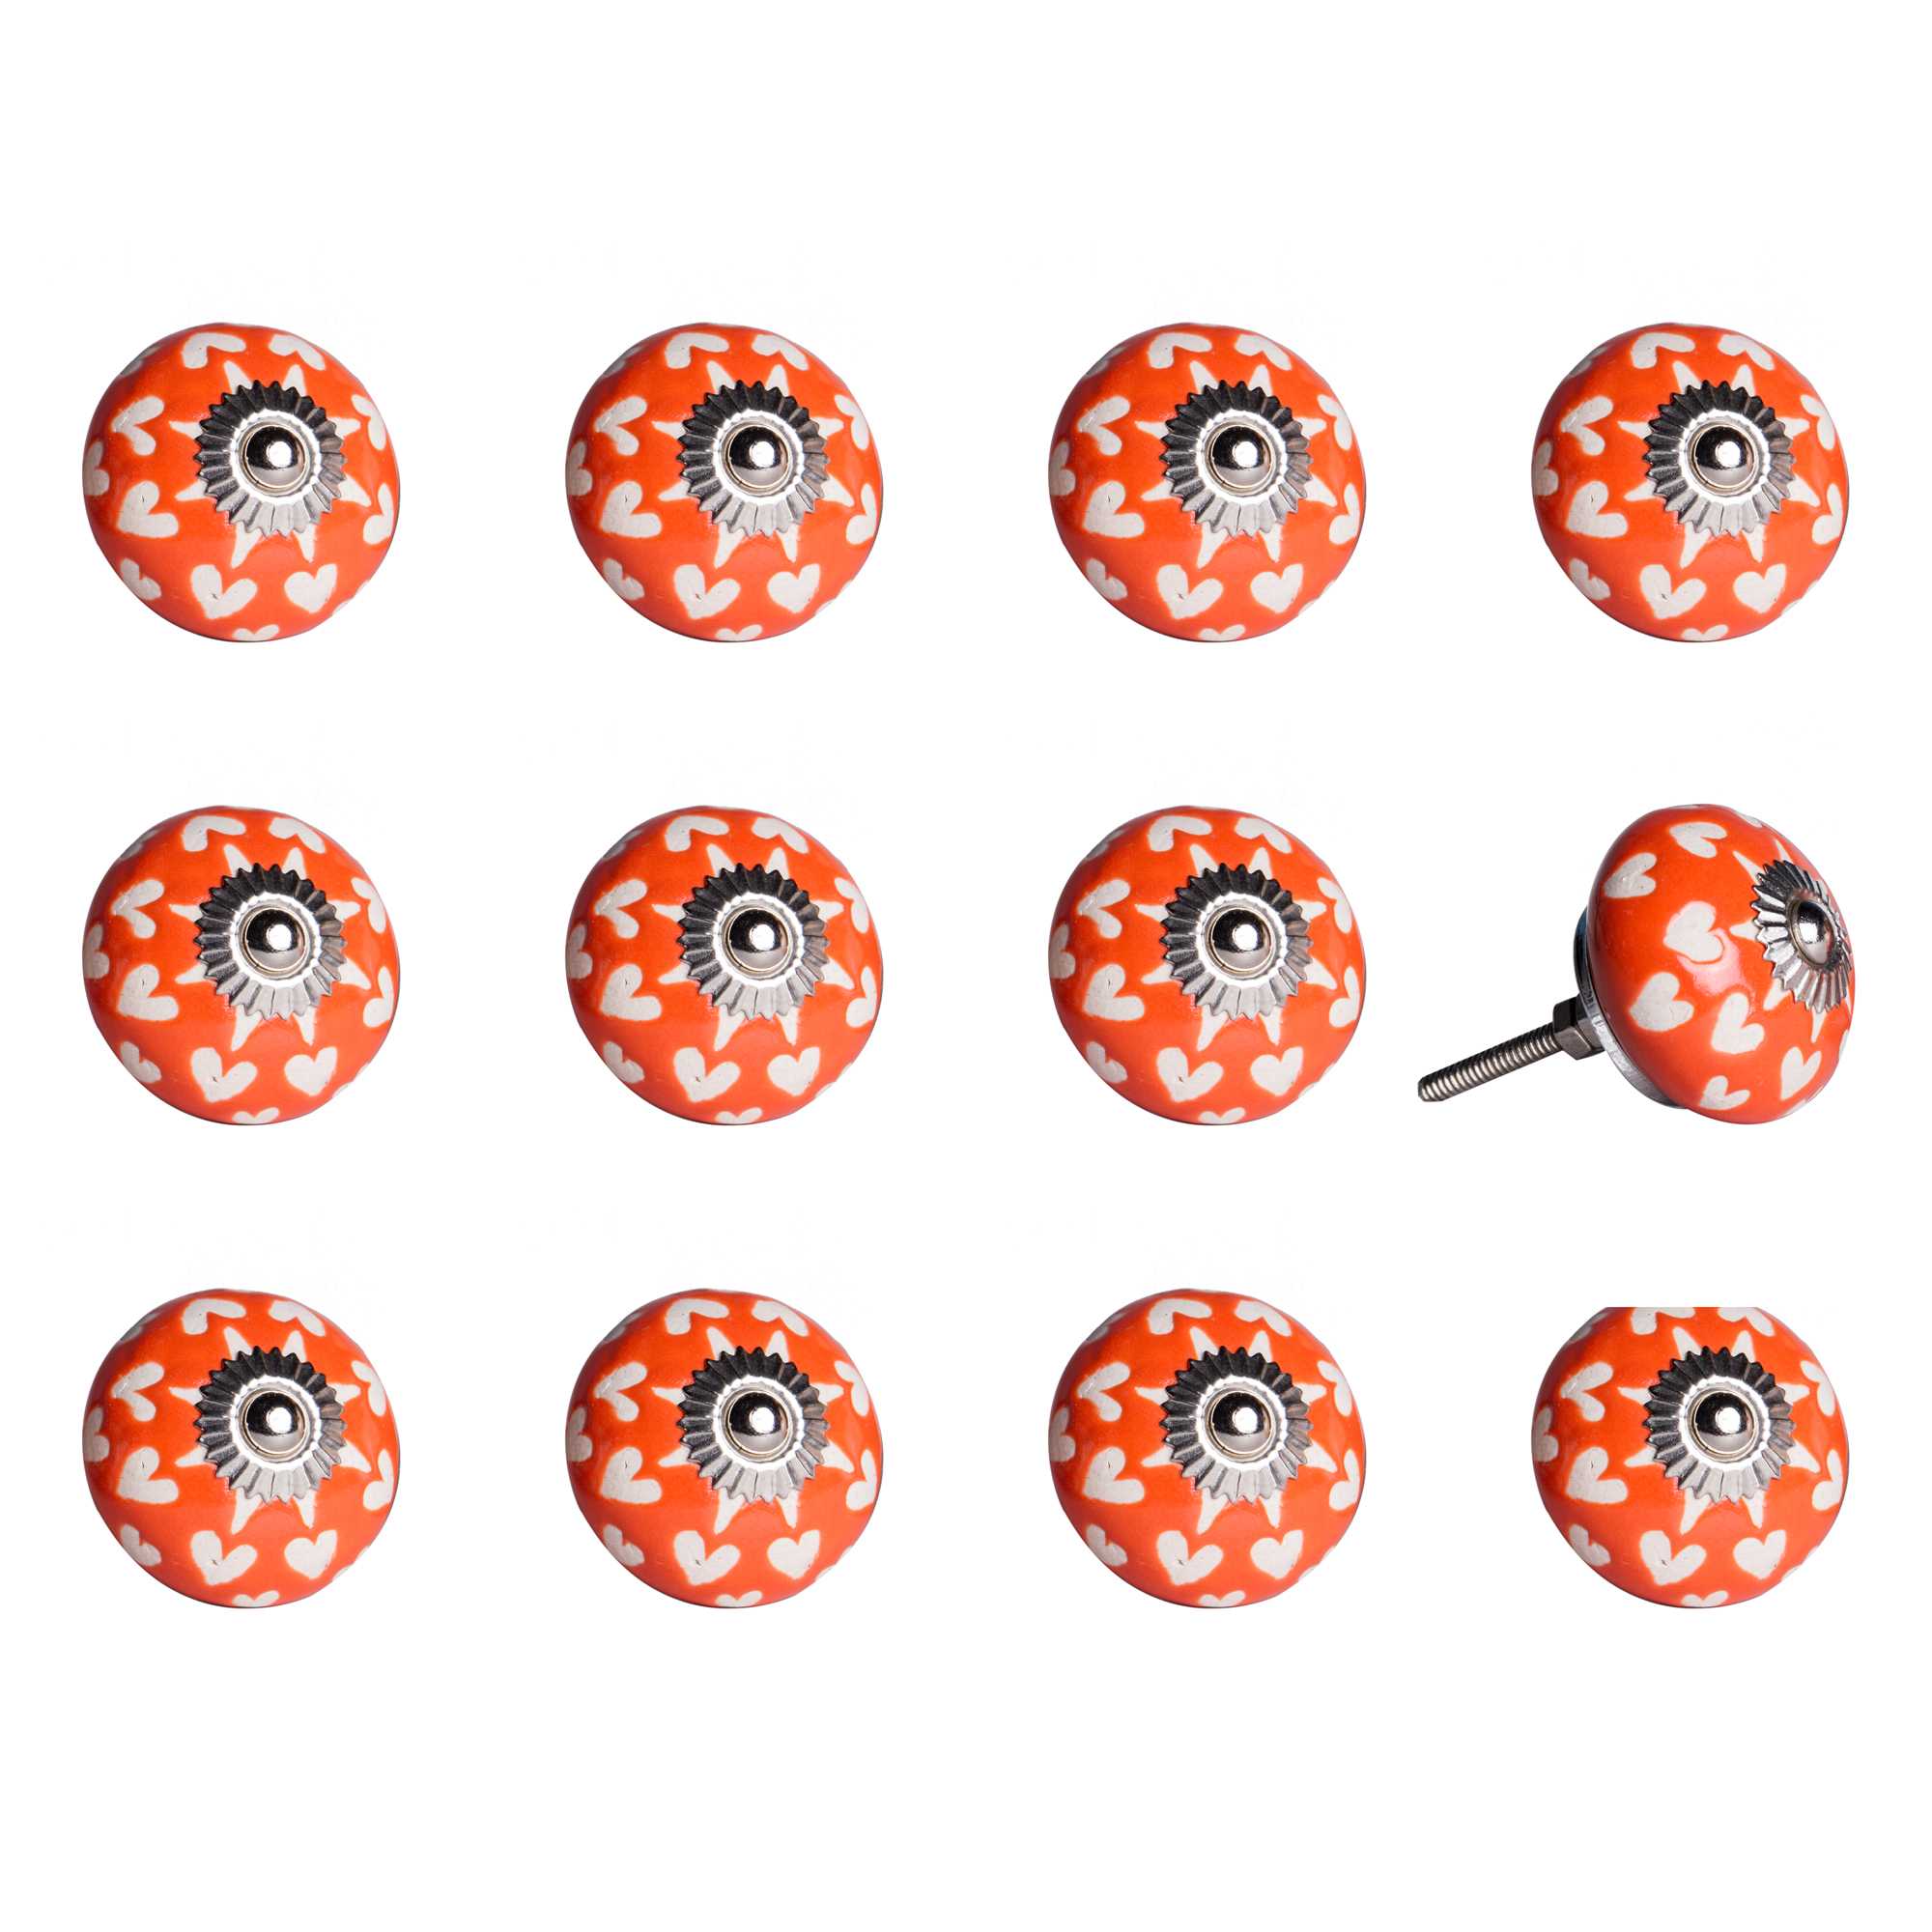 1.5" x 1.5" x 1.5" Orange, White and Silver - Knobs 12-Pack